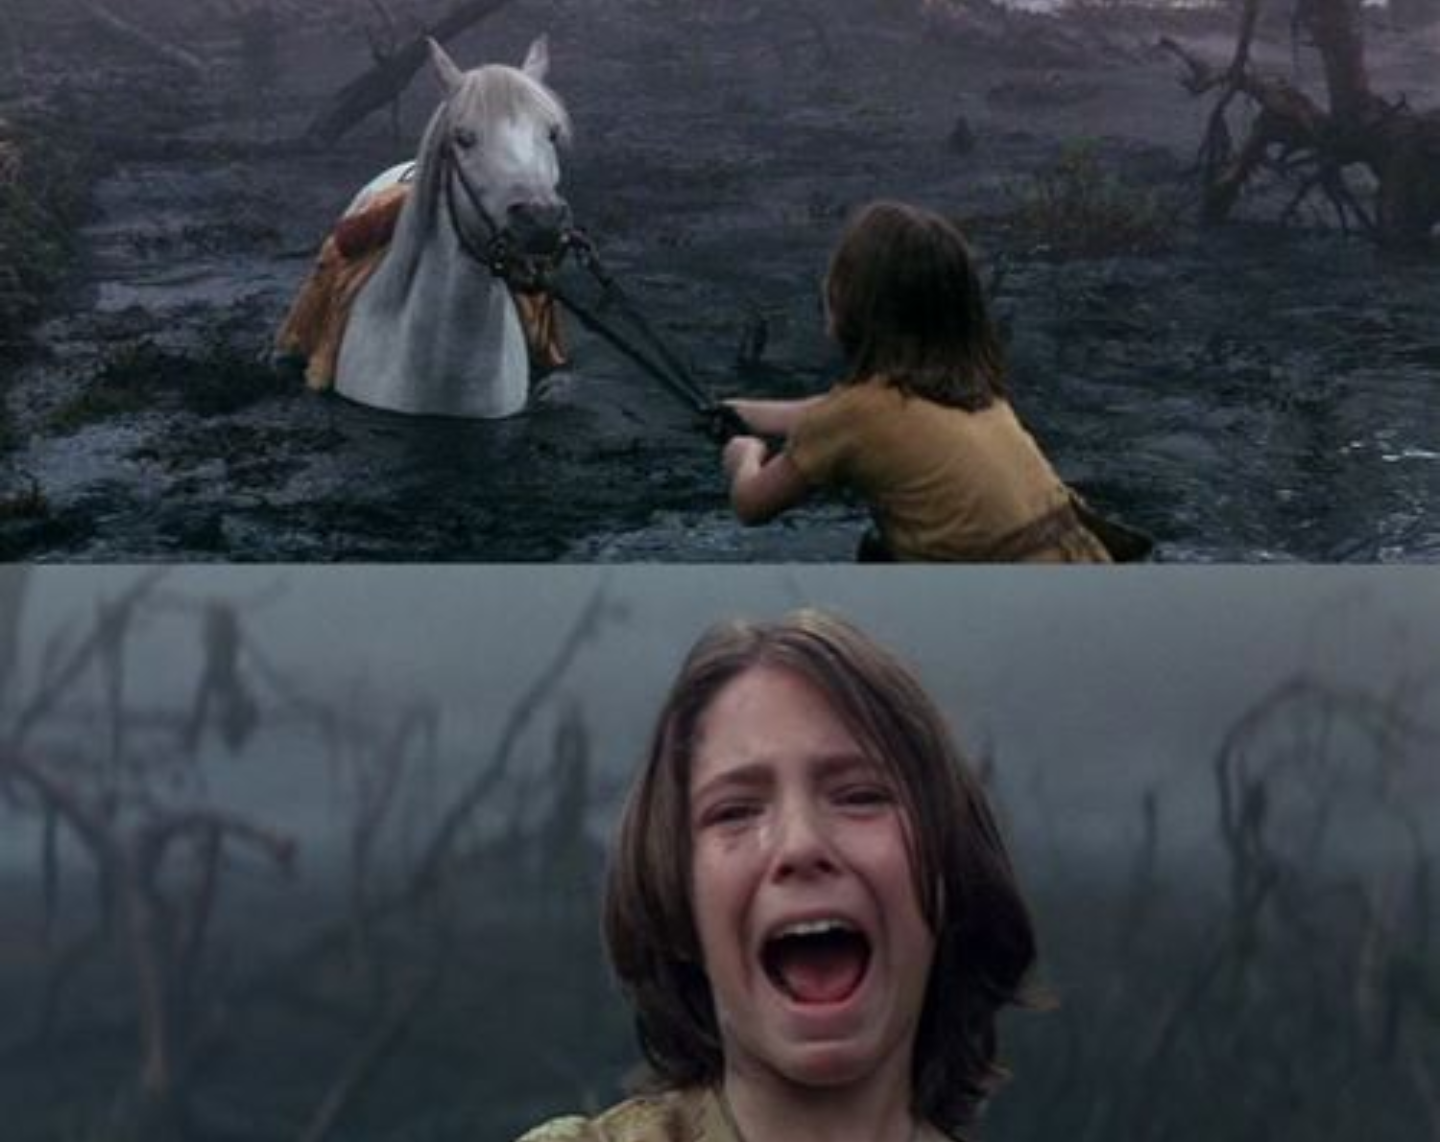 Atreyu crying while trying to save Artax from drowning